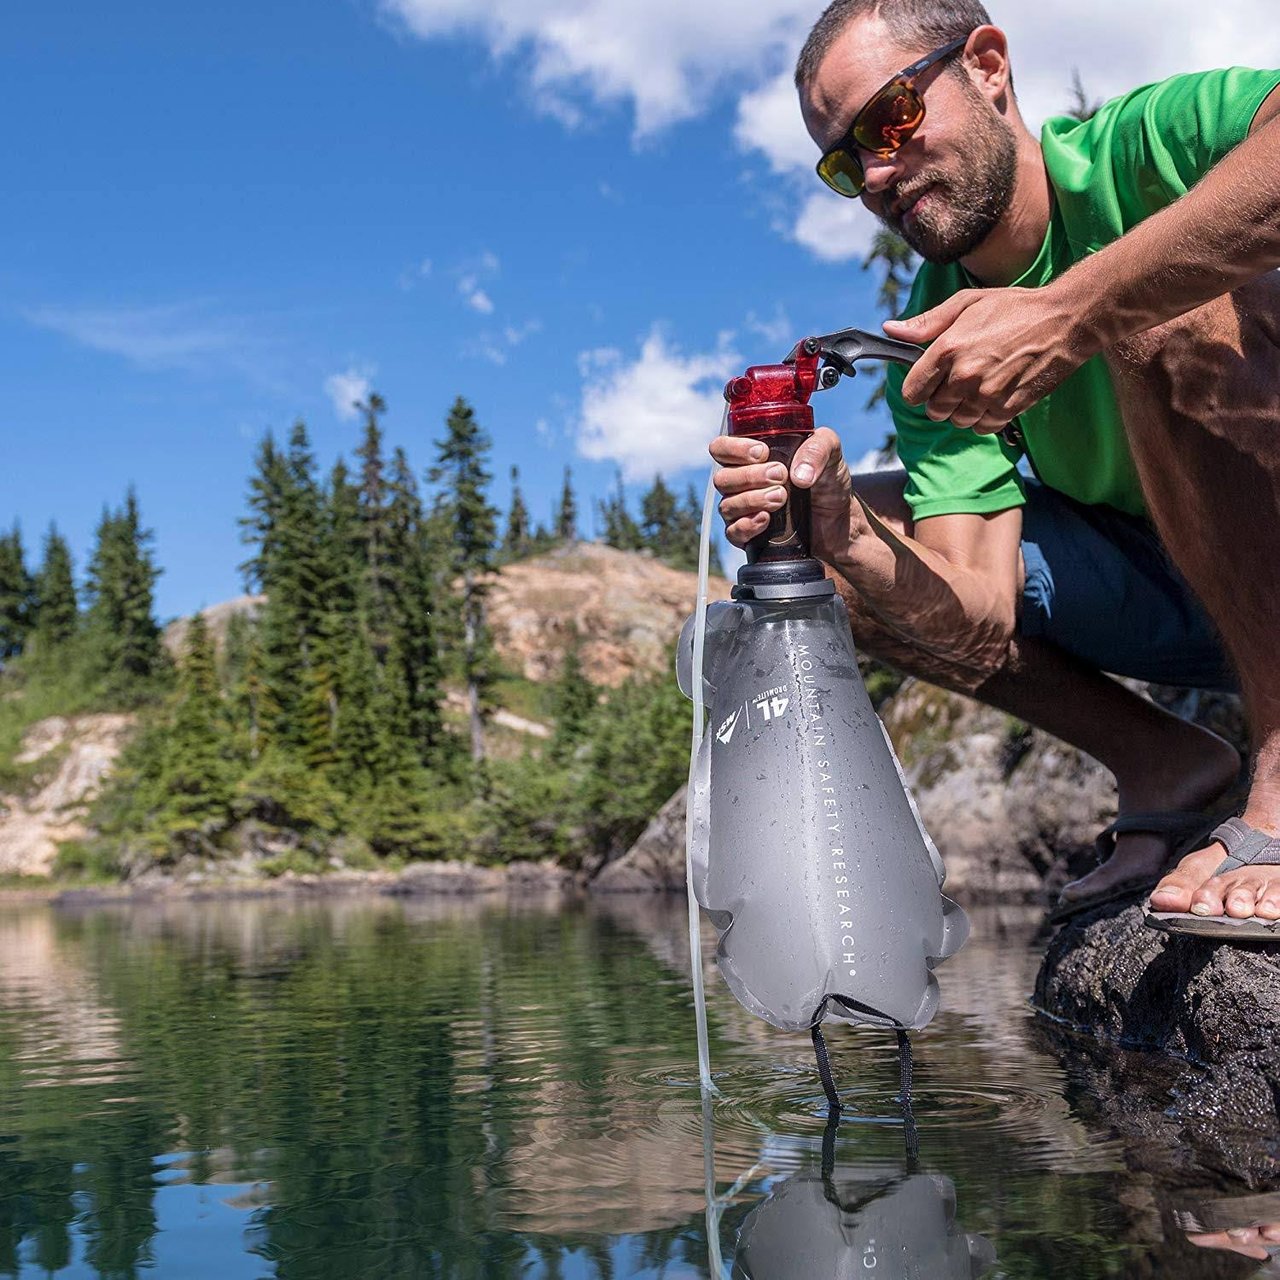 6 MiniWorks EX Backcountry Water Filter by MSR